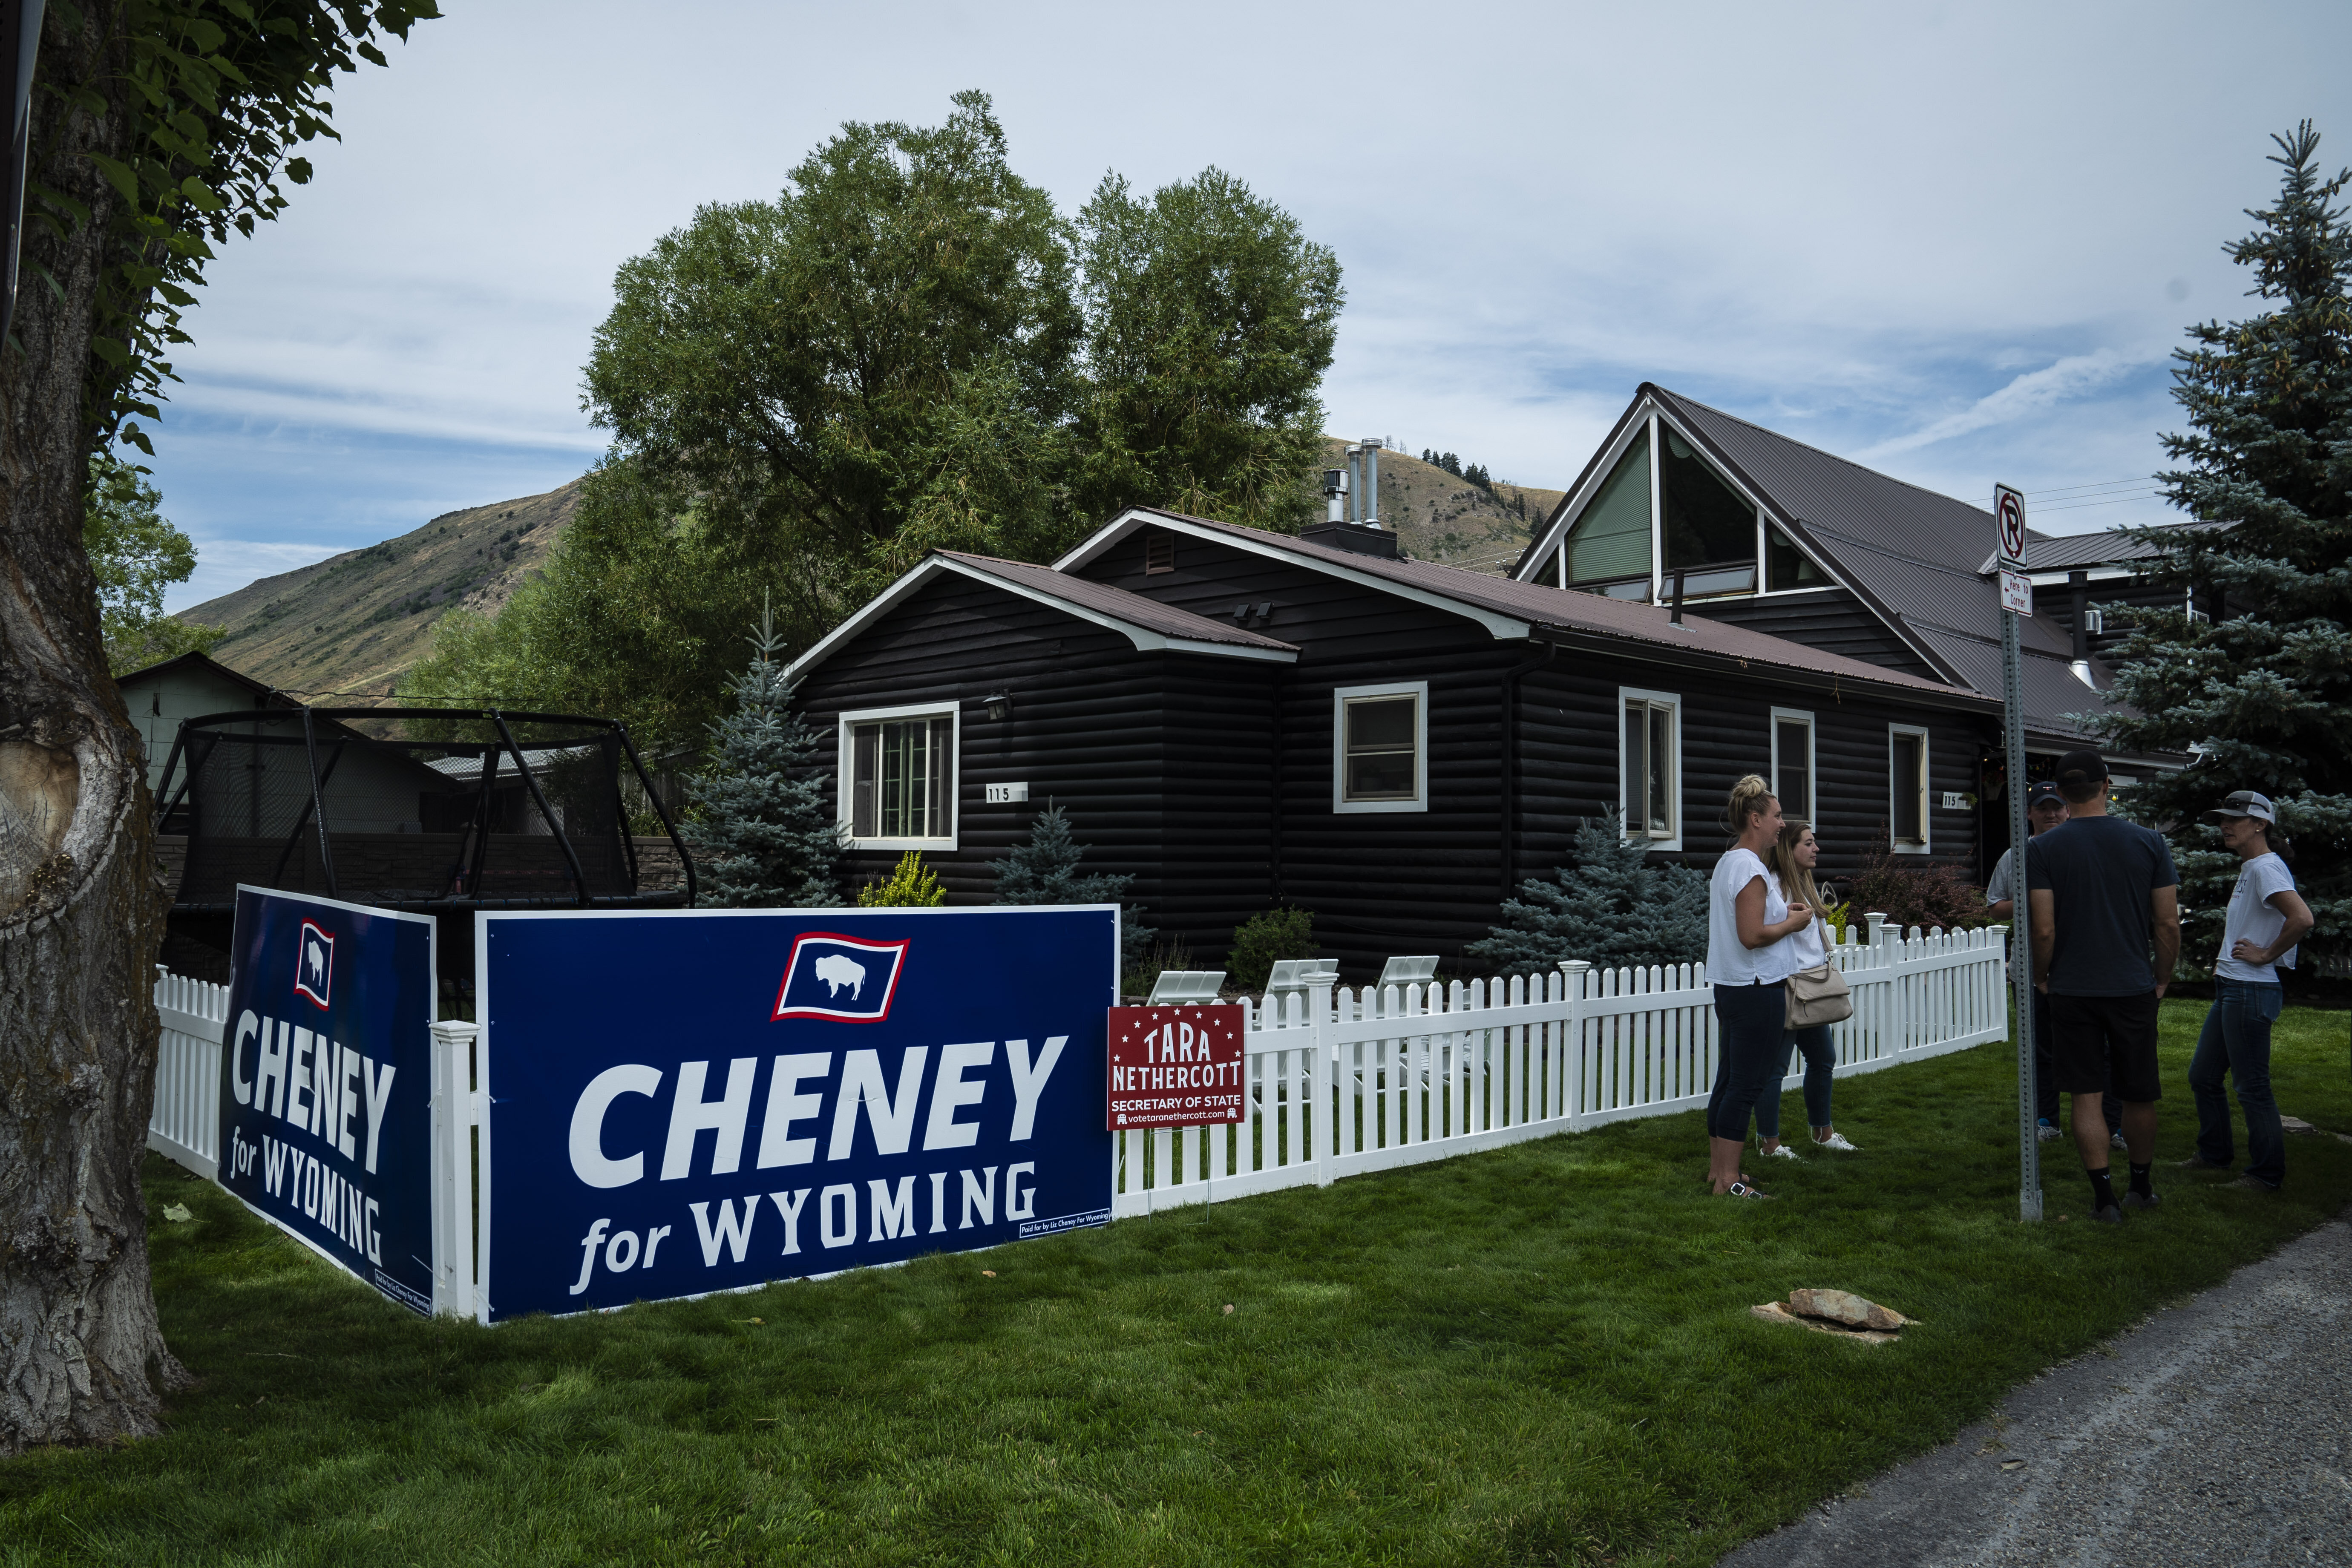 Homes in downtown Jackson, Wyoming, a blue part of the state, displayed signs in support of Cheney, signaling crossover support for her primary.